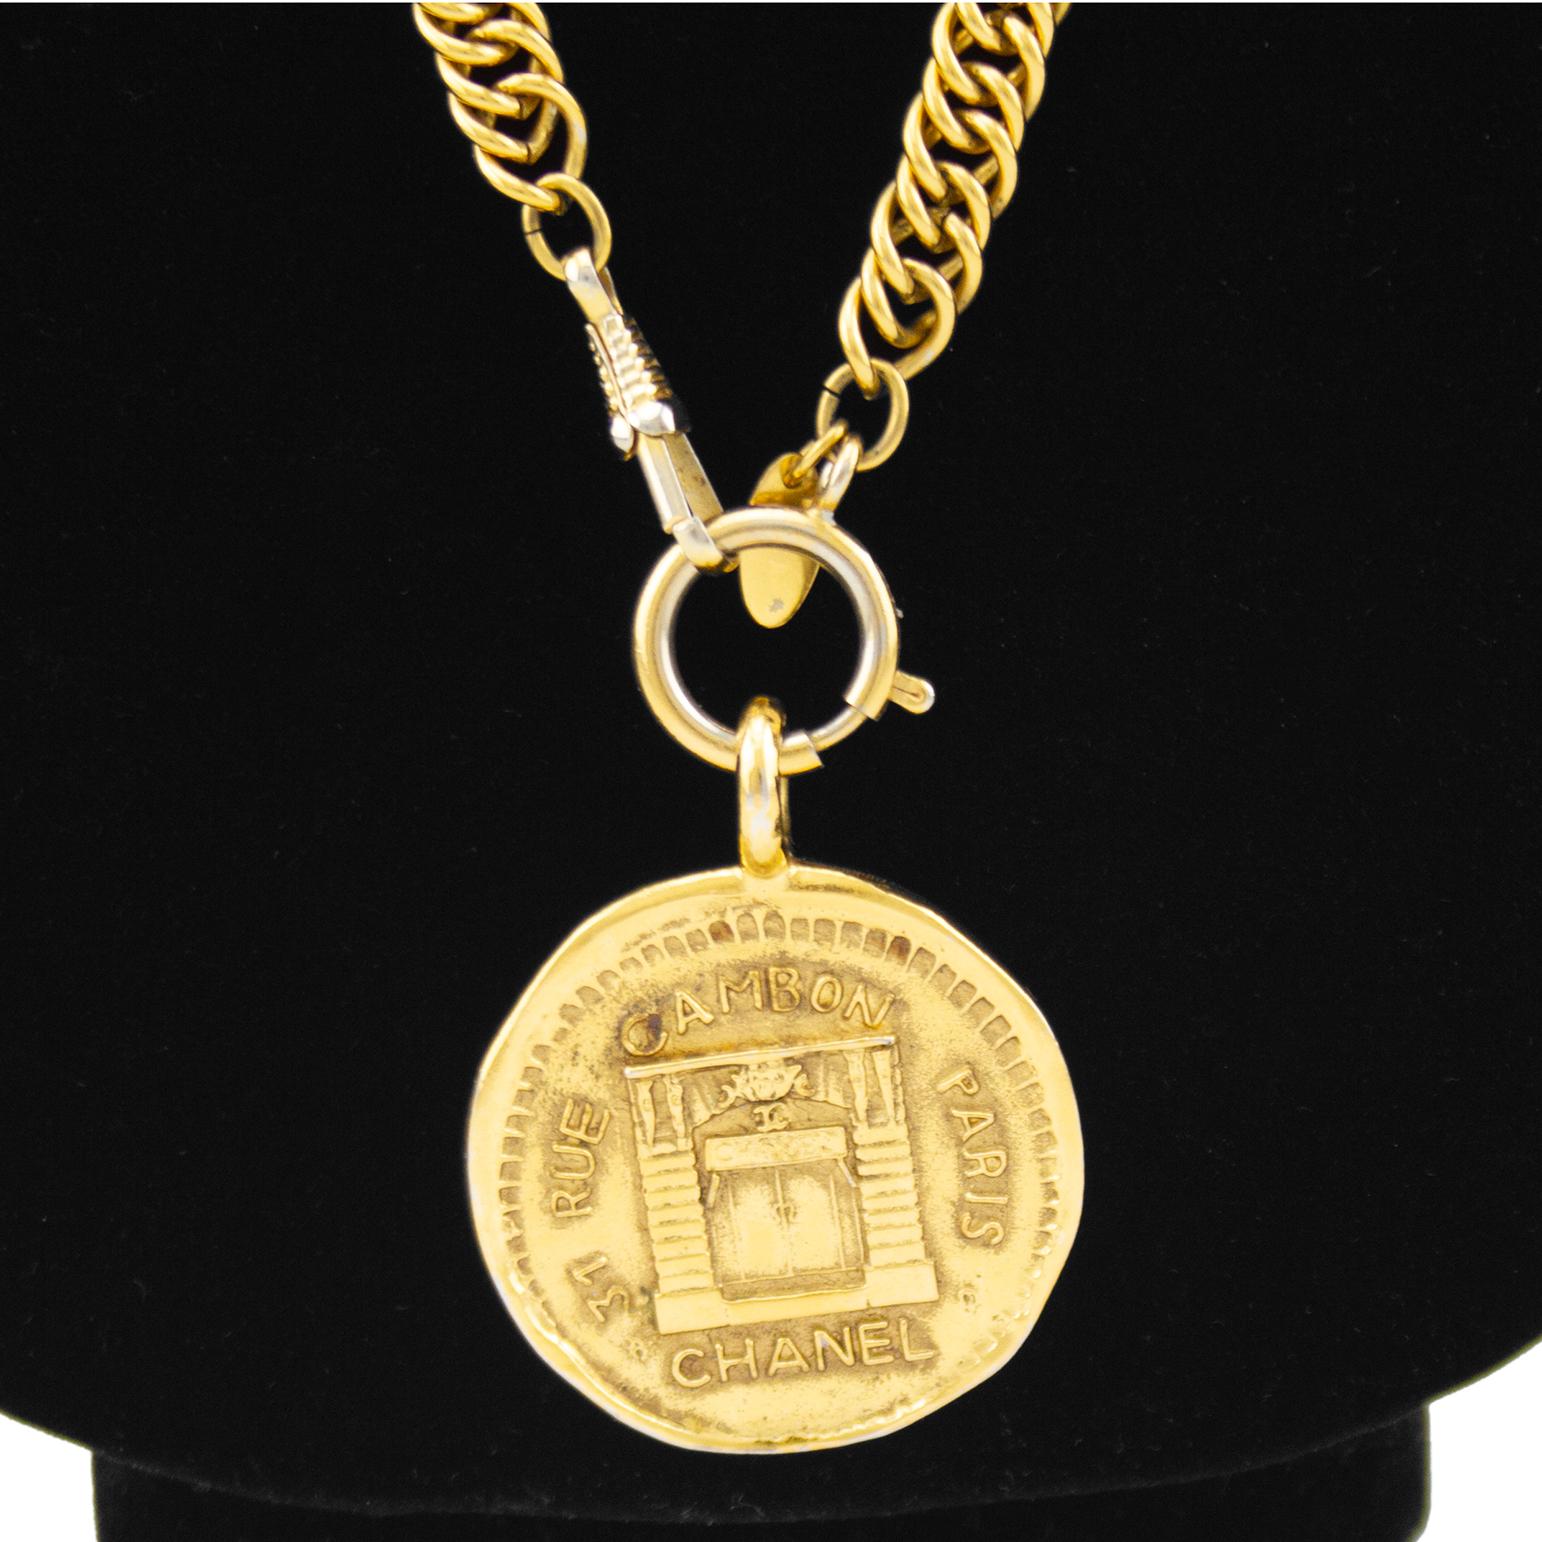 1980s Chanel Chain 31 Rue Cambon, Paris Medallion Necklace In Good Condition For Sale In Toronto, Ontario